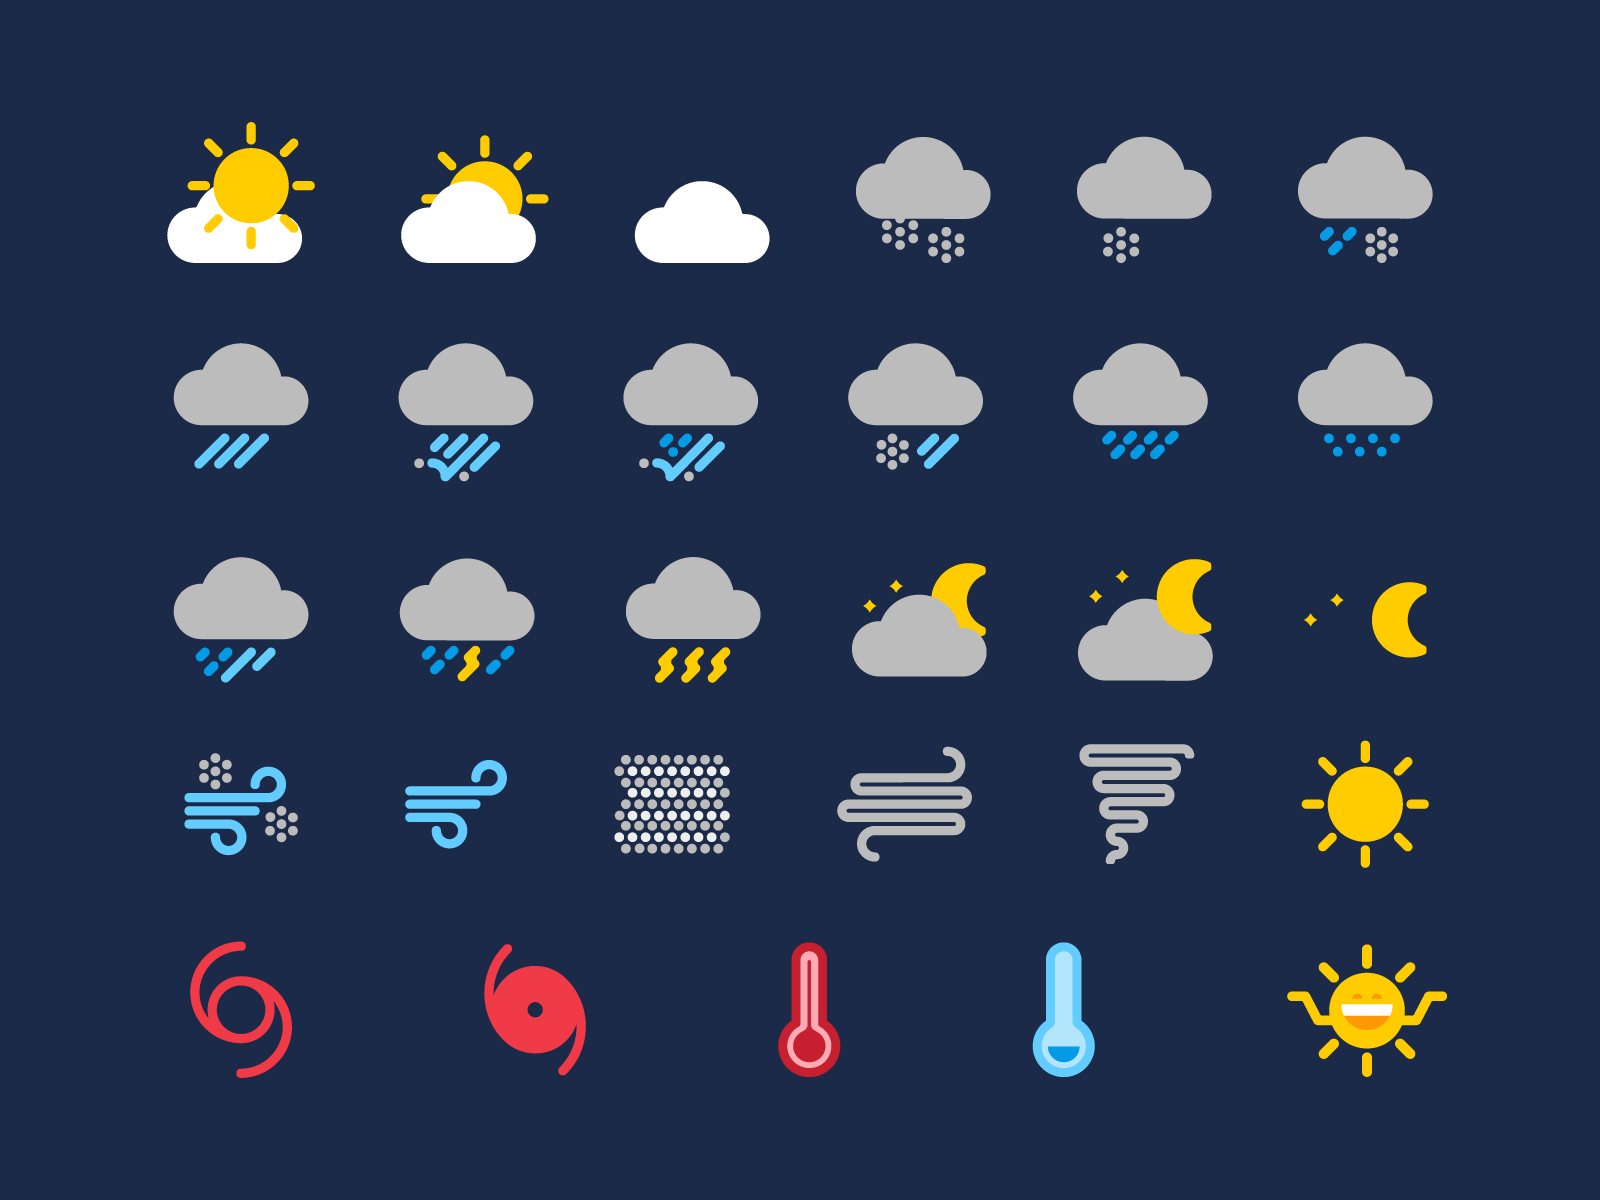 Weather icons by Matt Whalley on Dribbble